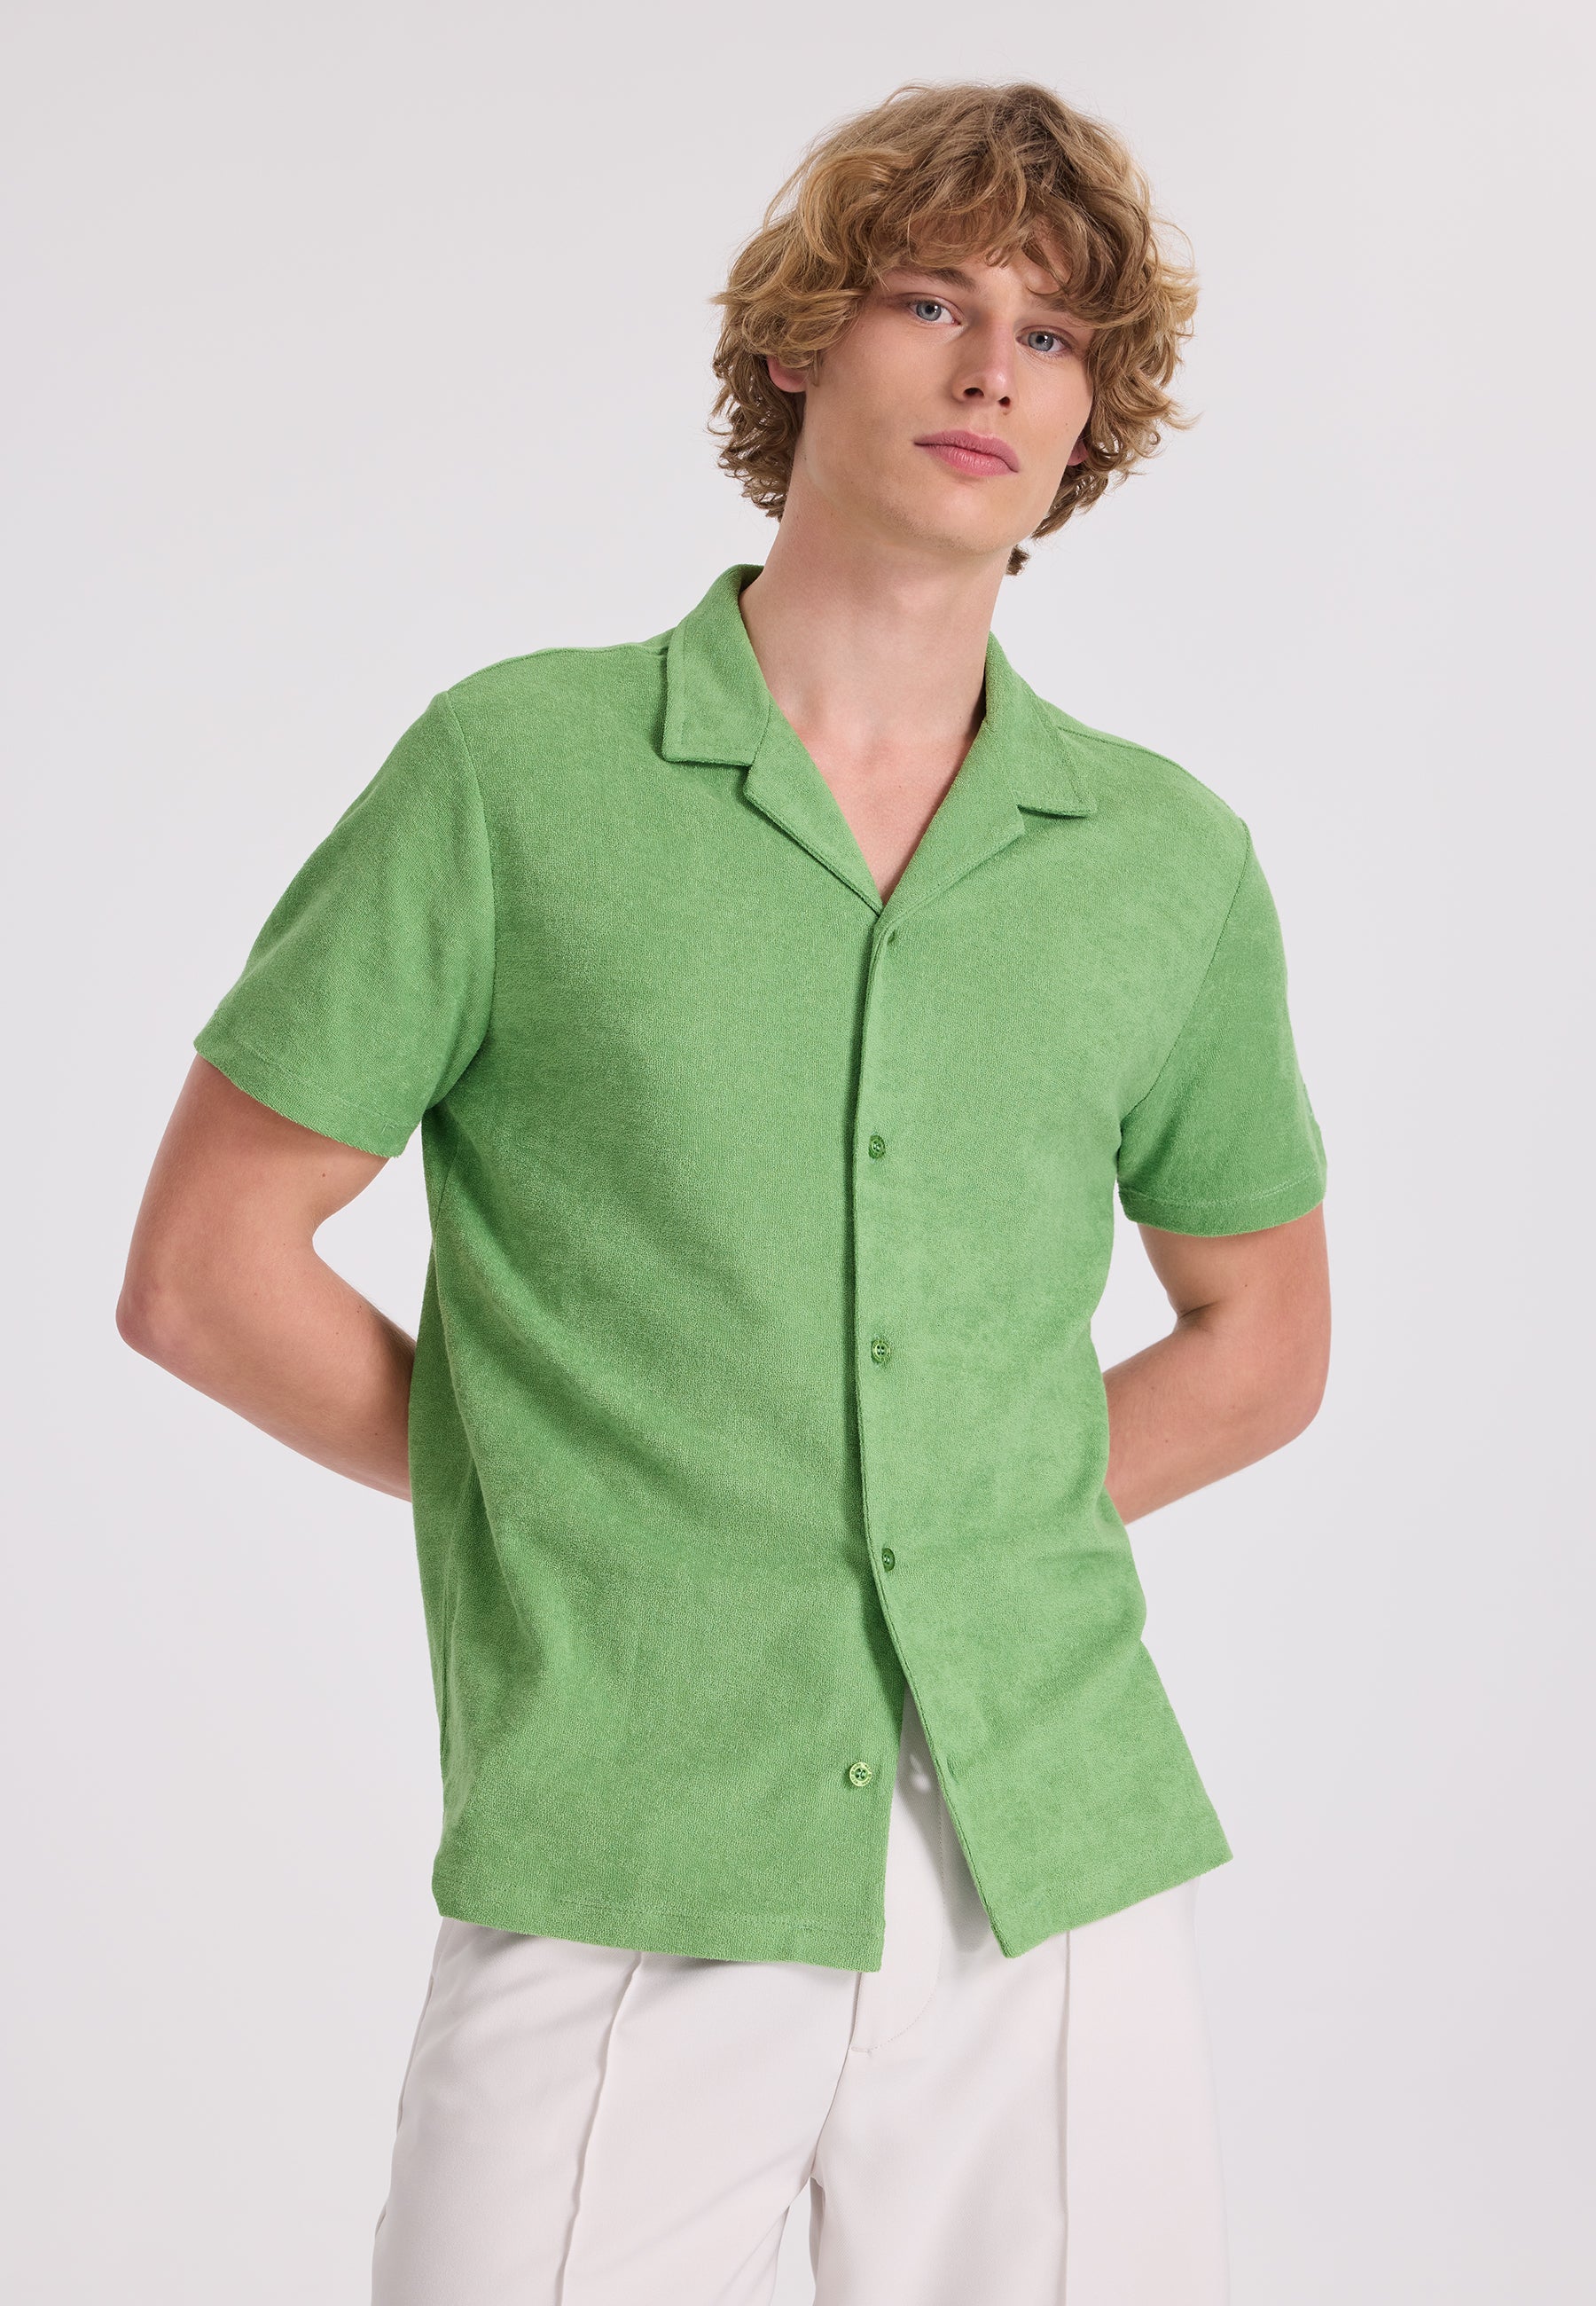 BREEZE TERRY TOWELLING S/S SHIRT in Piquant Green